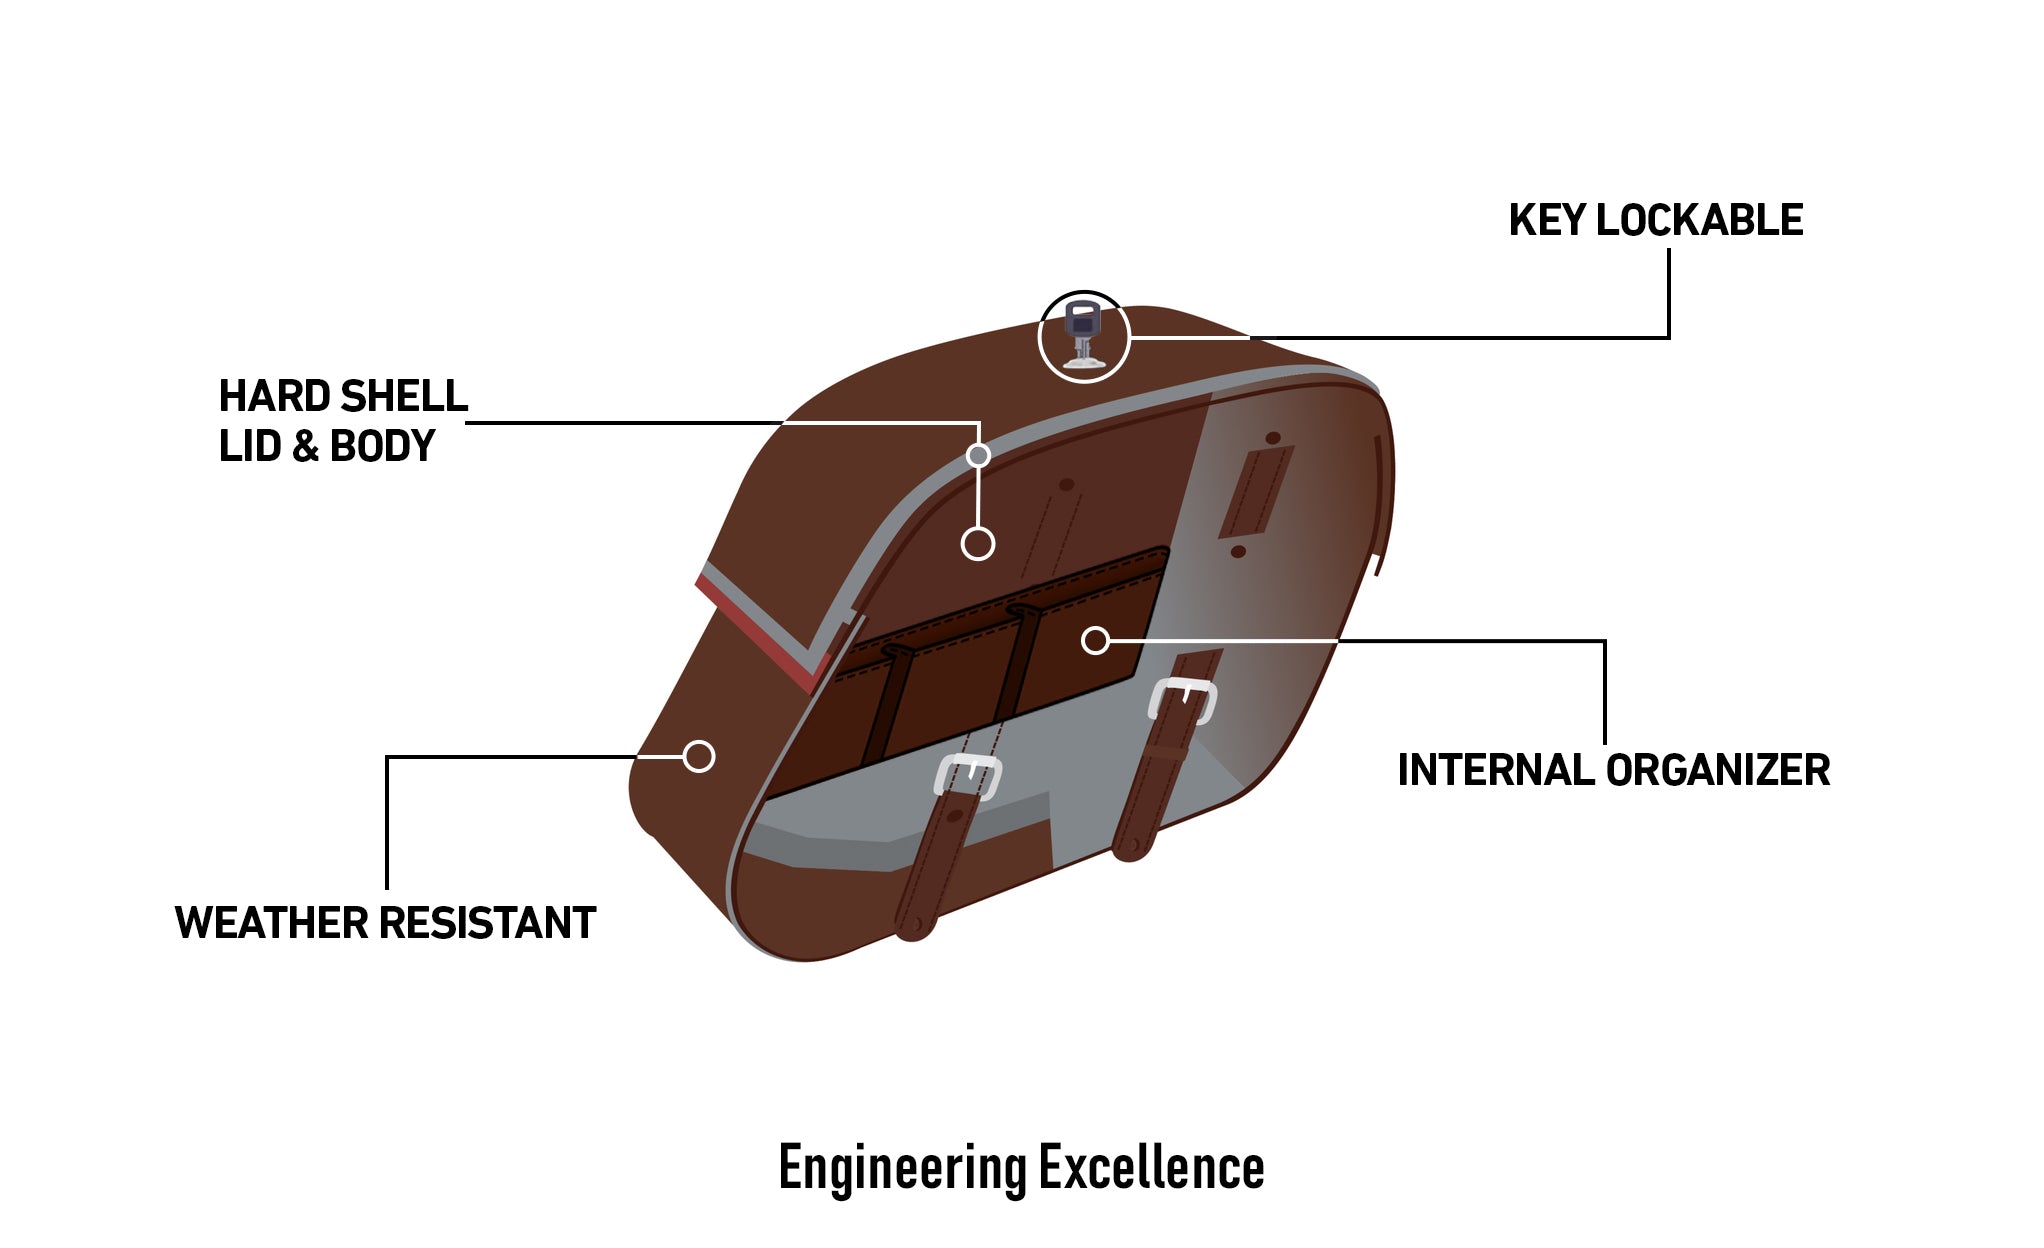 Viking Odin Brown Large Yamaha Stryker Leather Motorcycle Saddlebags Engineering Excellence with Bag on Bike @expand